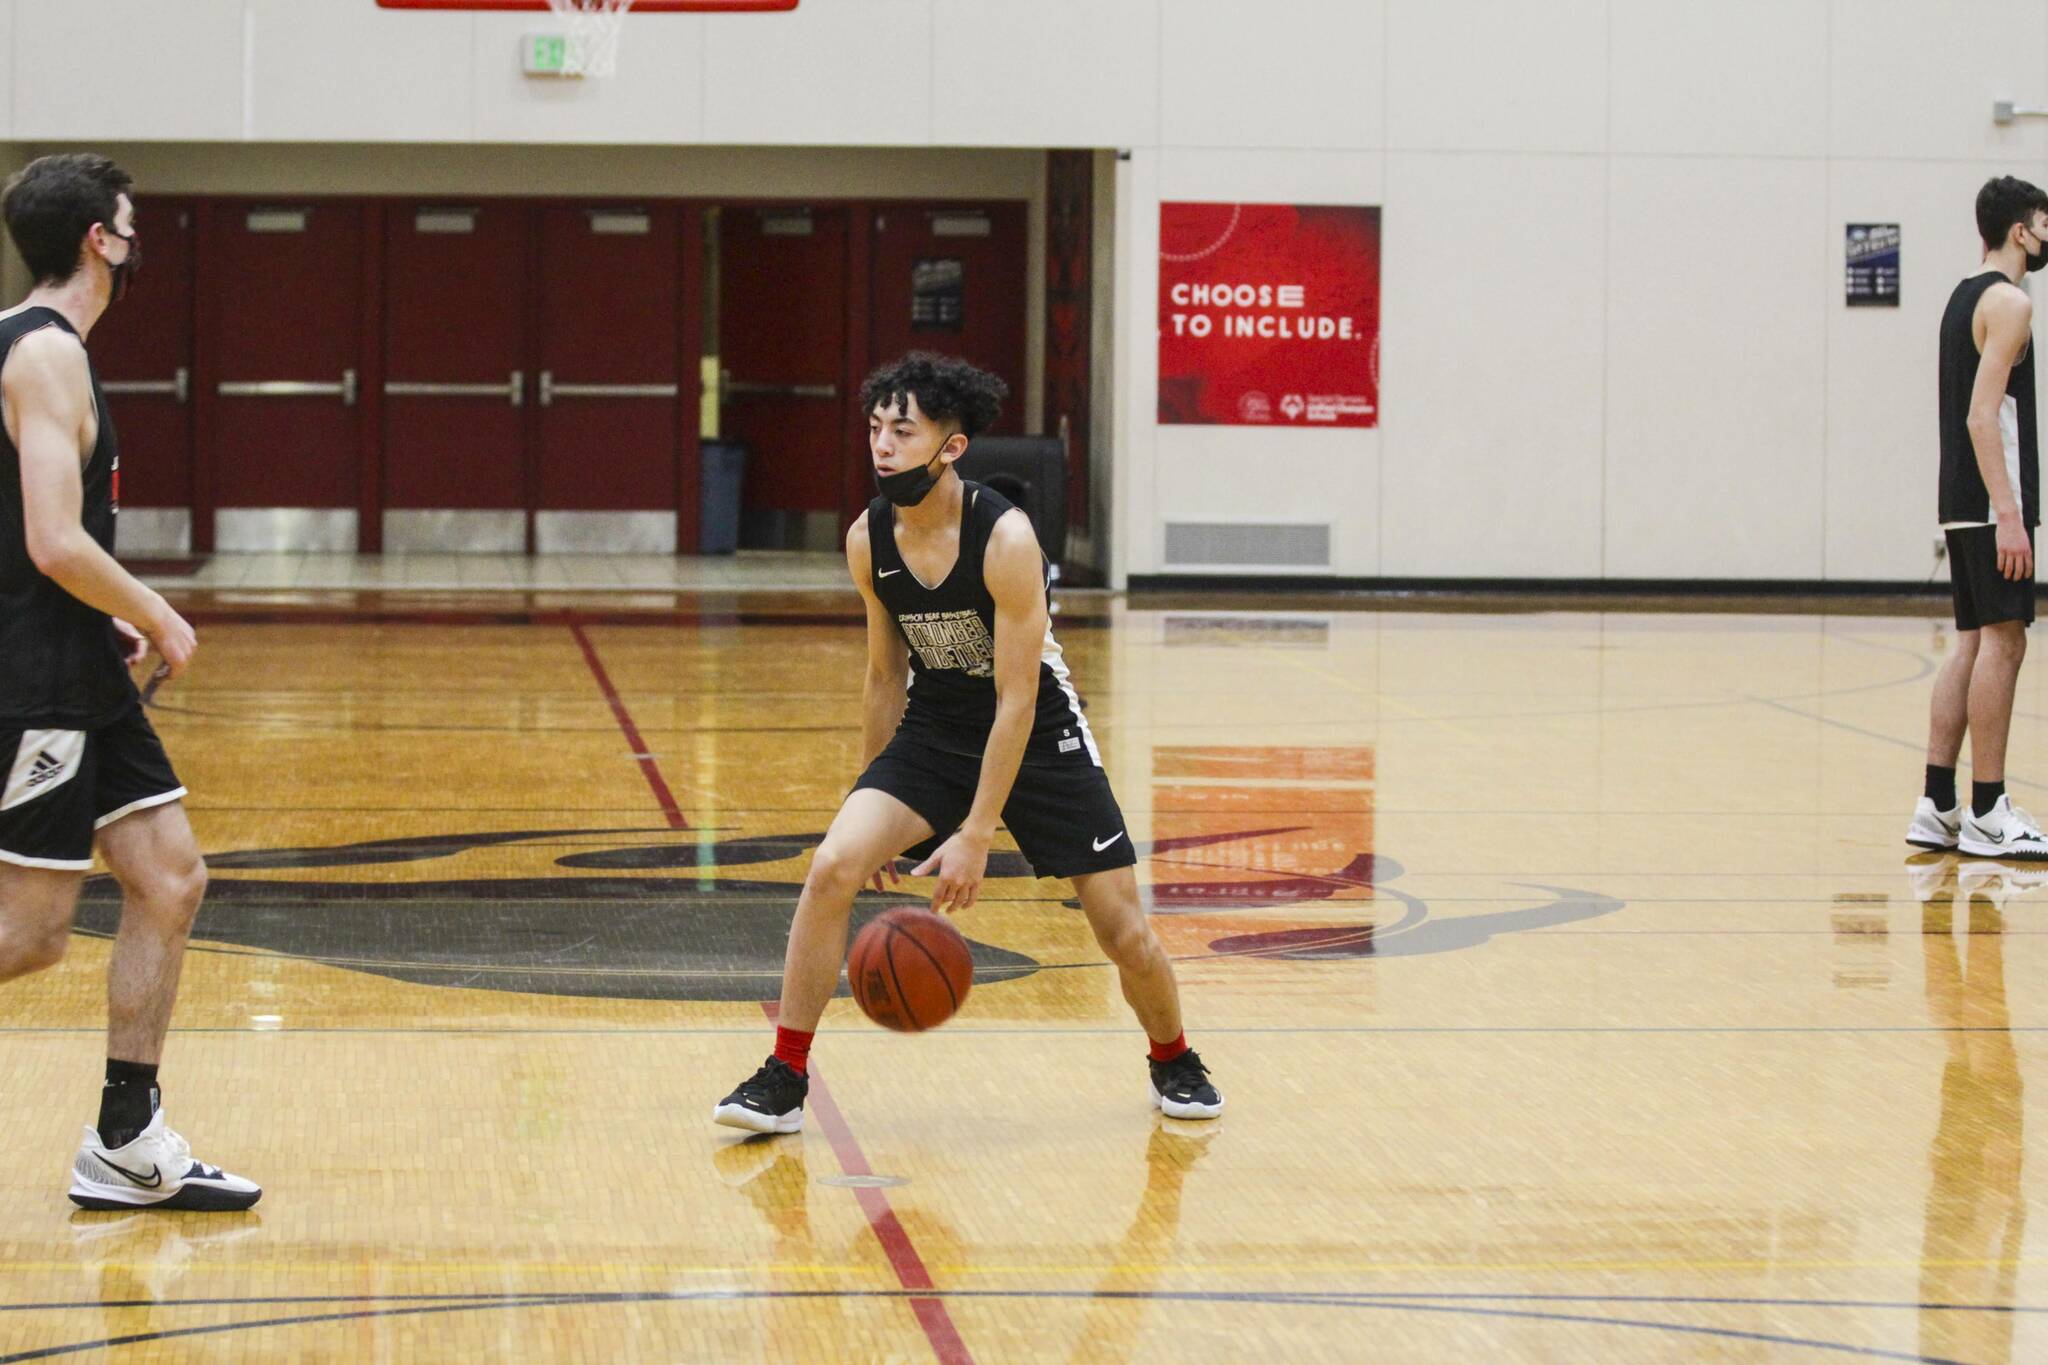 Alwen Carrillo, player for the Juneau-Douglas High School: Yadaa.at Kalé, dribbles during practice on Dec. 14, 2021. Both JDHS teams will compete in the Capital City Classic beginning on Dec. 27, 2021. (Michael S. Lockett / Juneau Empire)